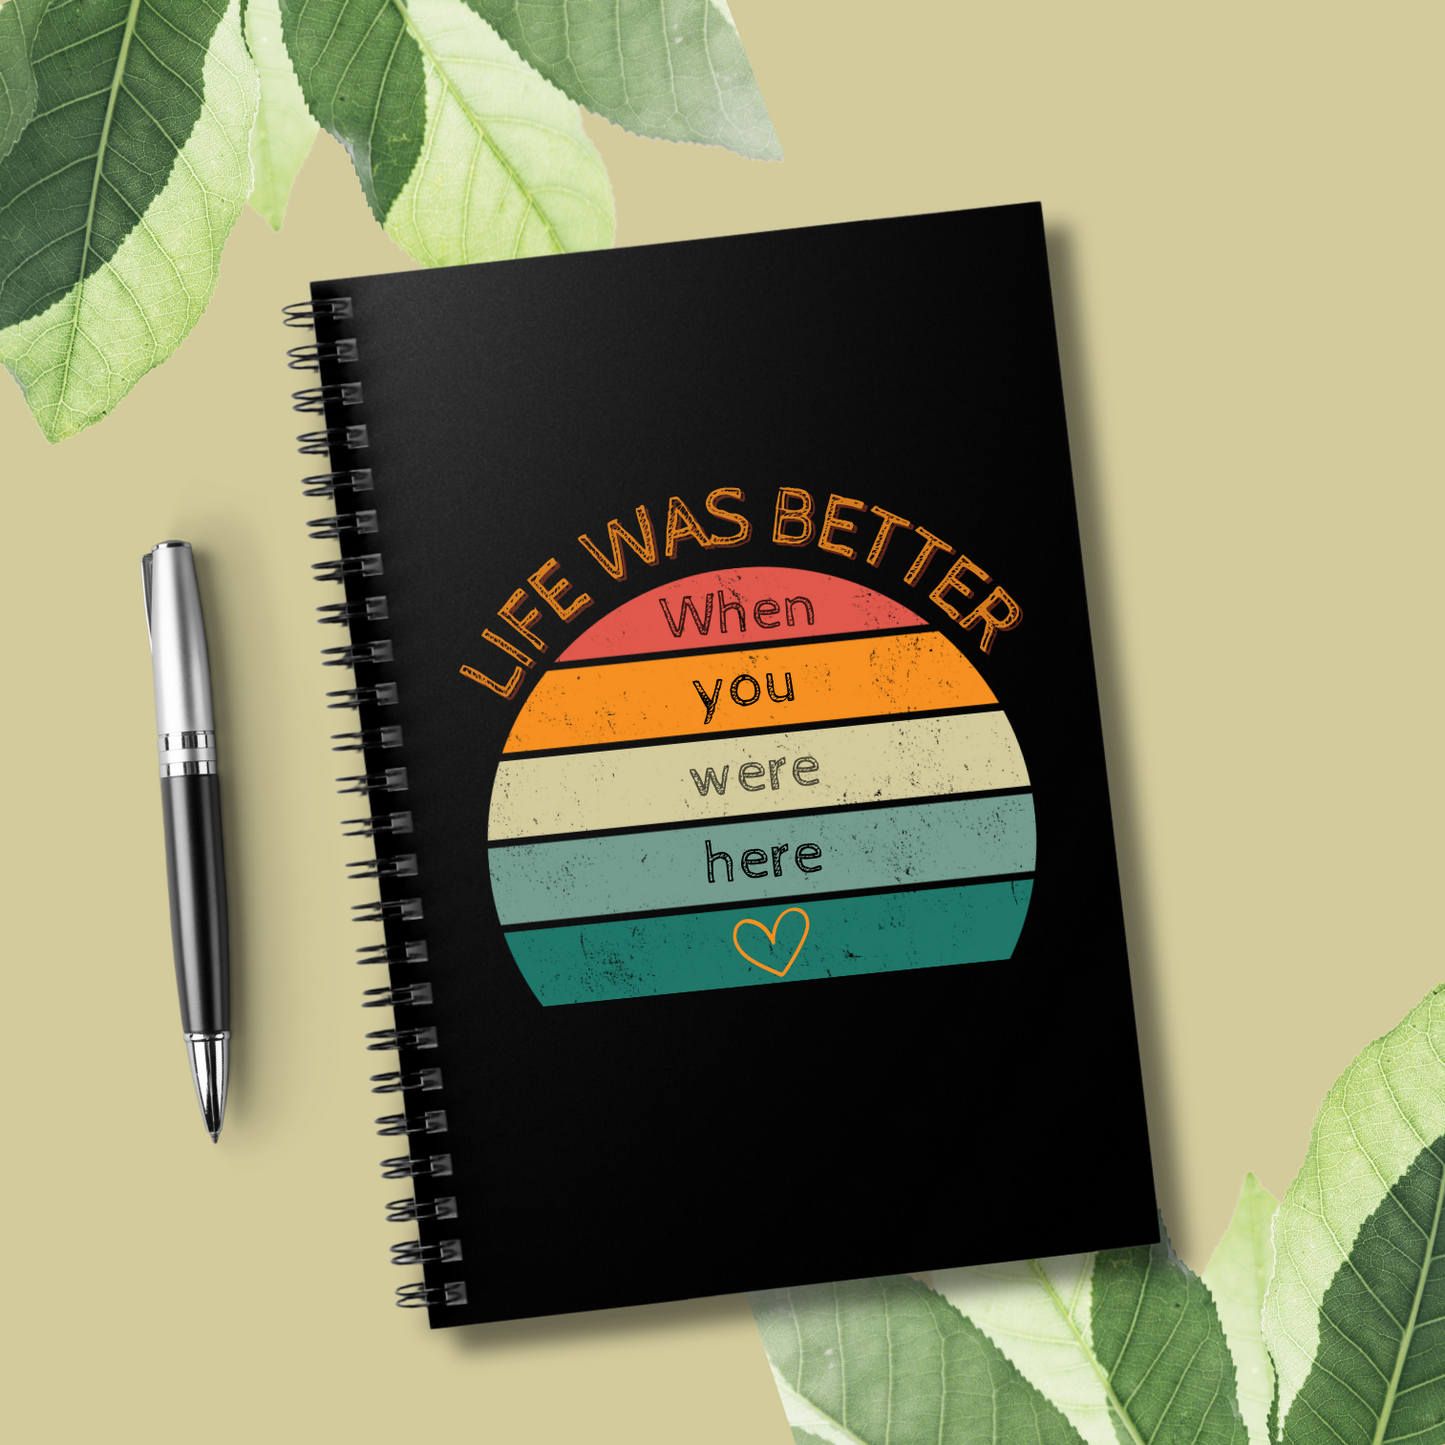 Life Was Better When You Were Here Spiral Notebook